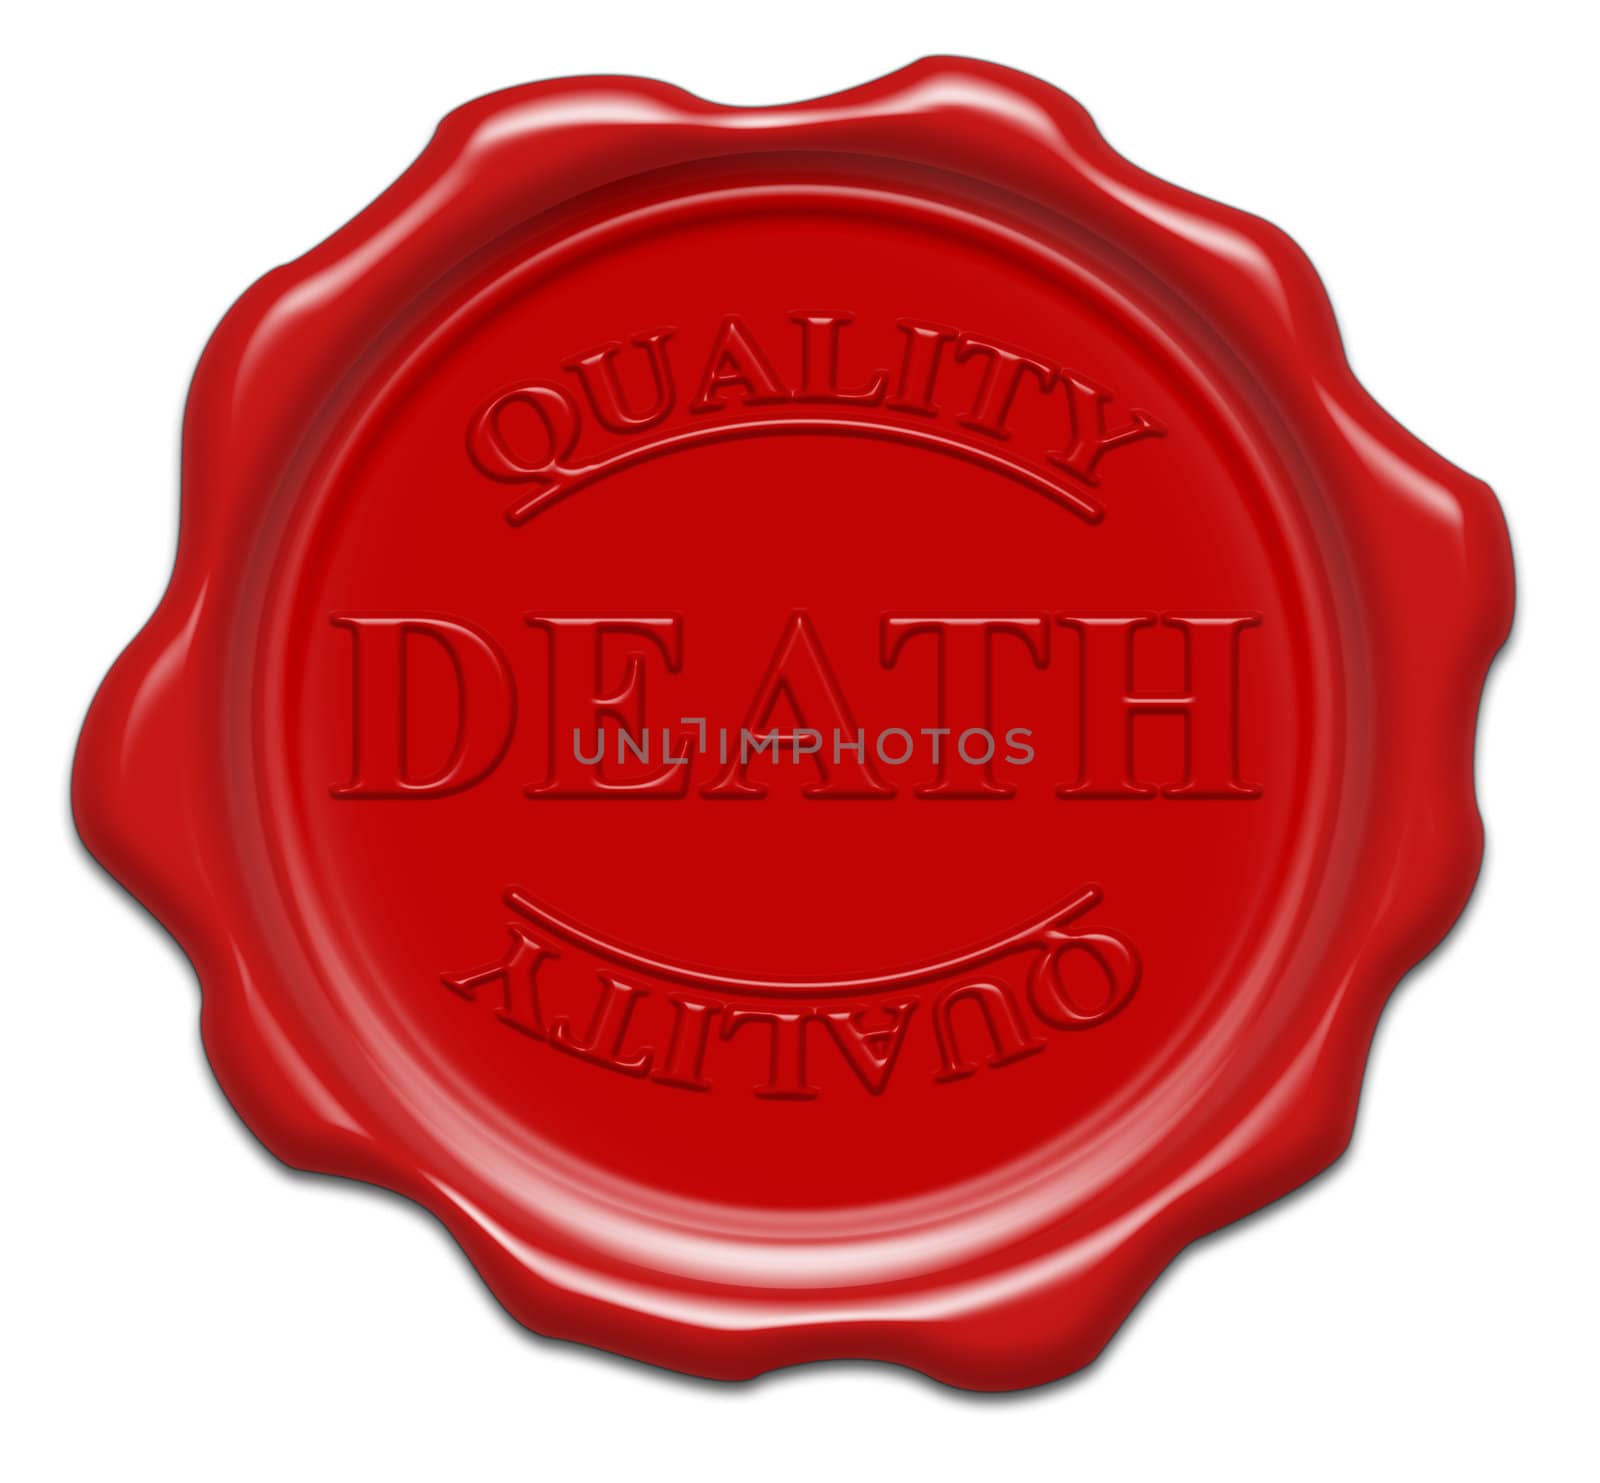 quality death - illustration red wax seal isolated on white back by mozzyb